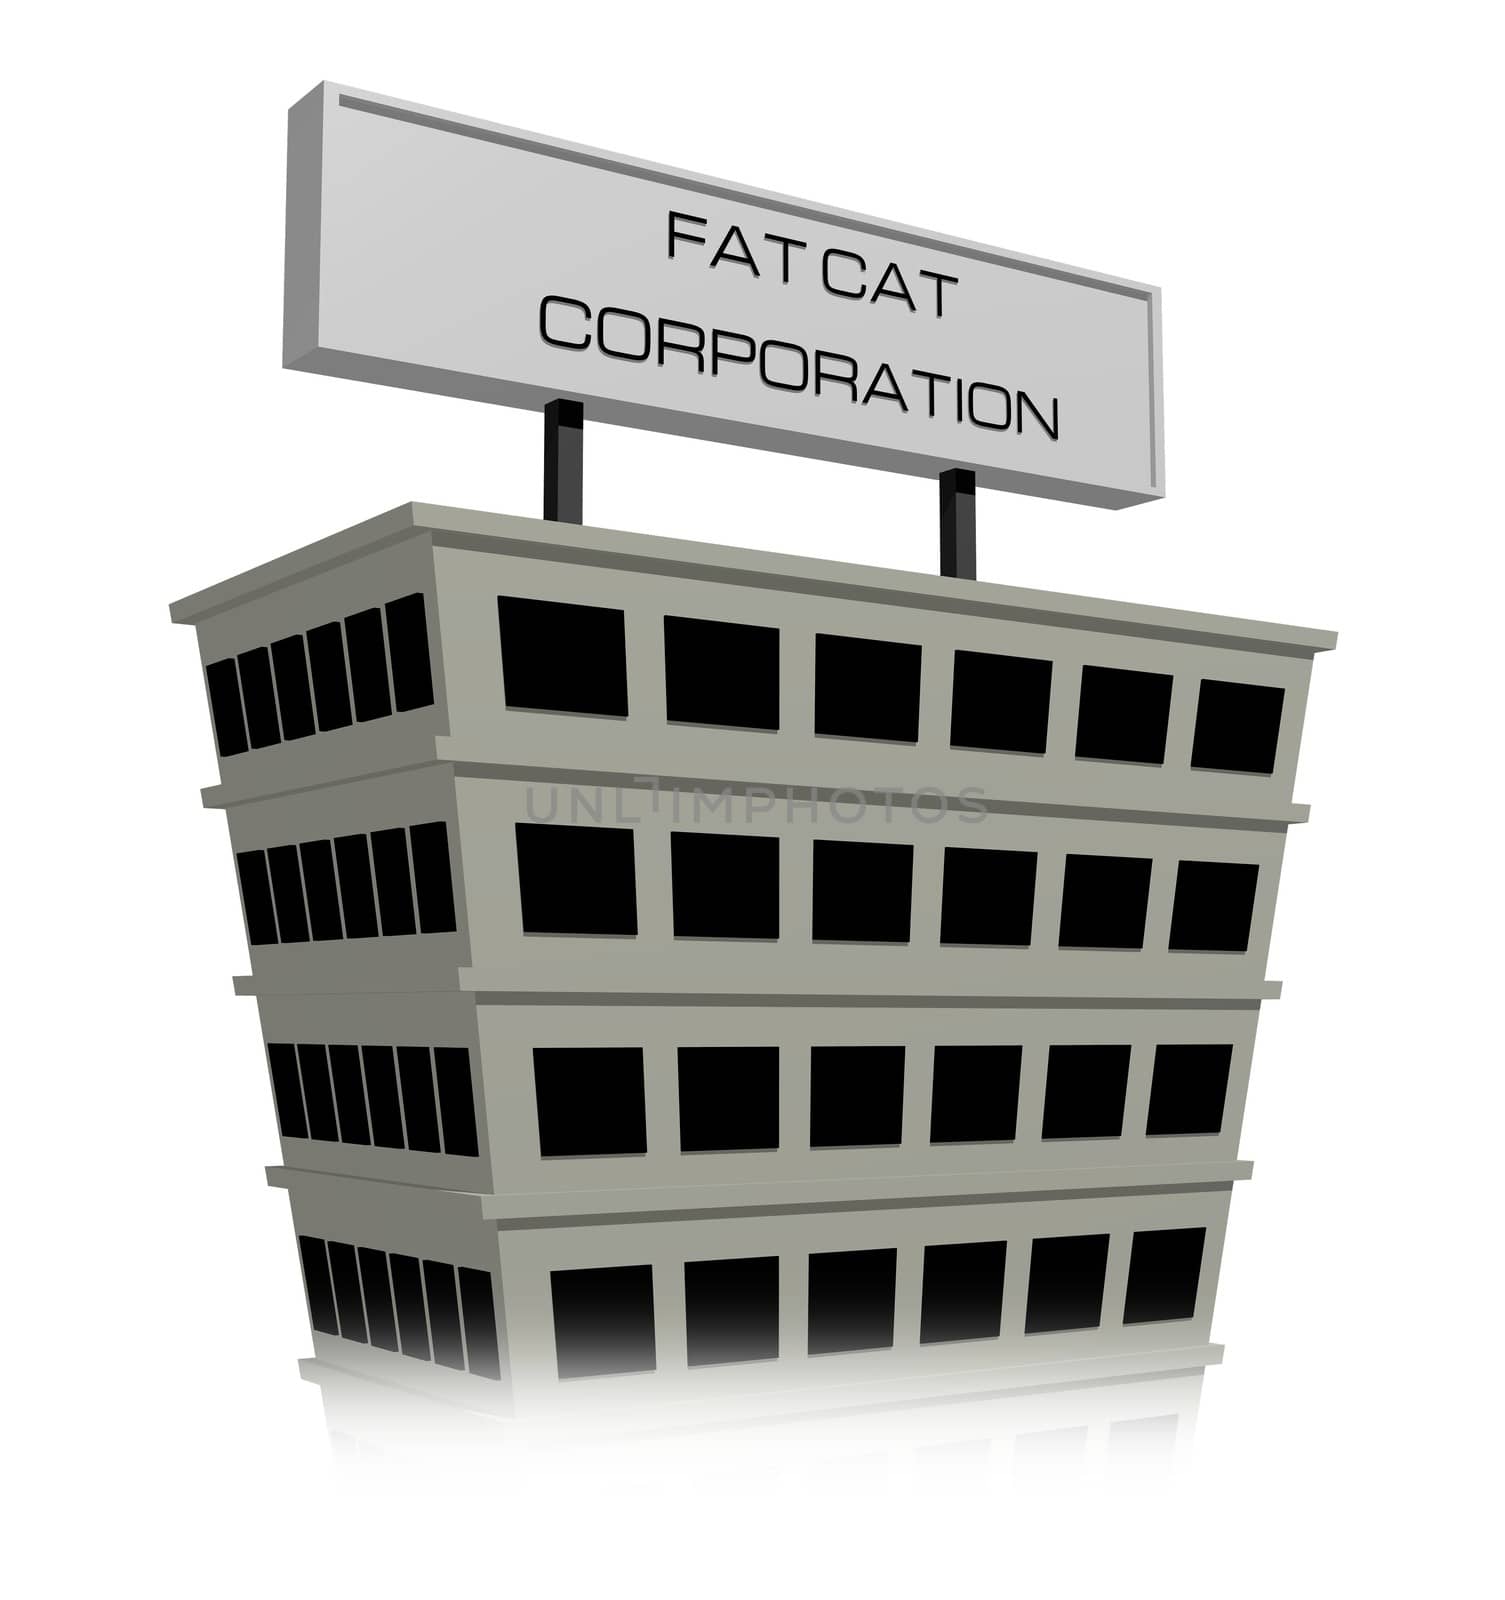 Illustration of a building with a sign that reads "Fat Cat Corporation"